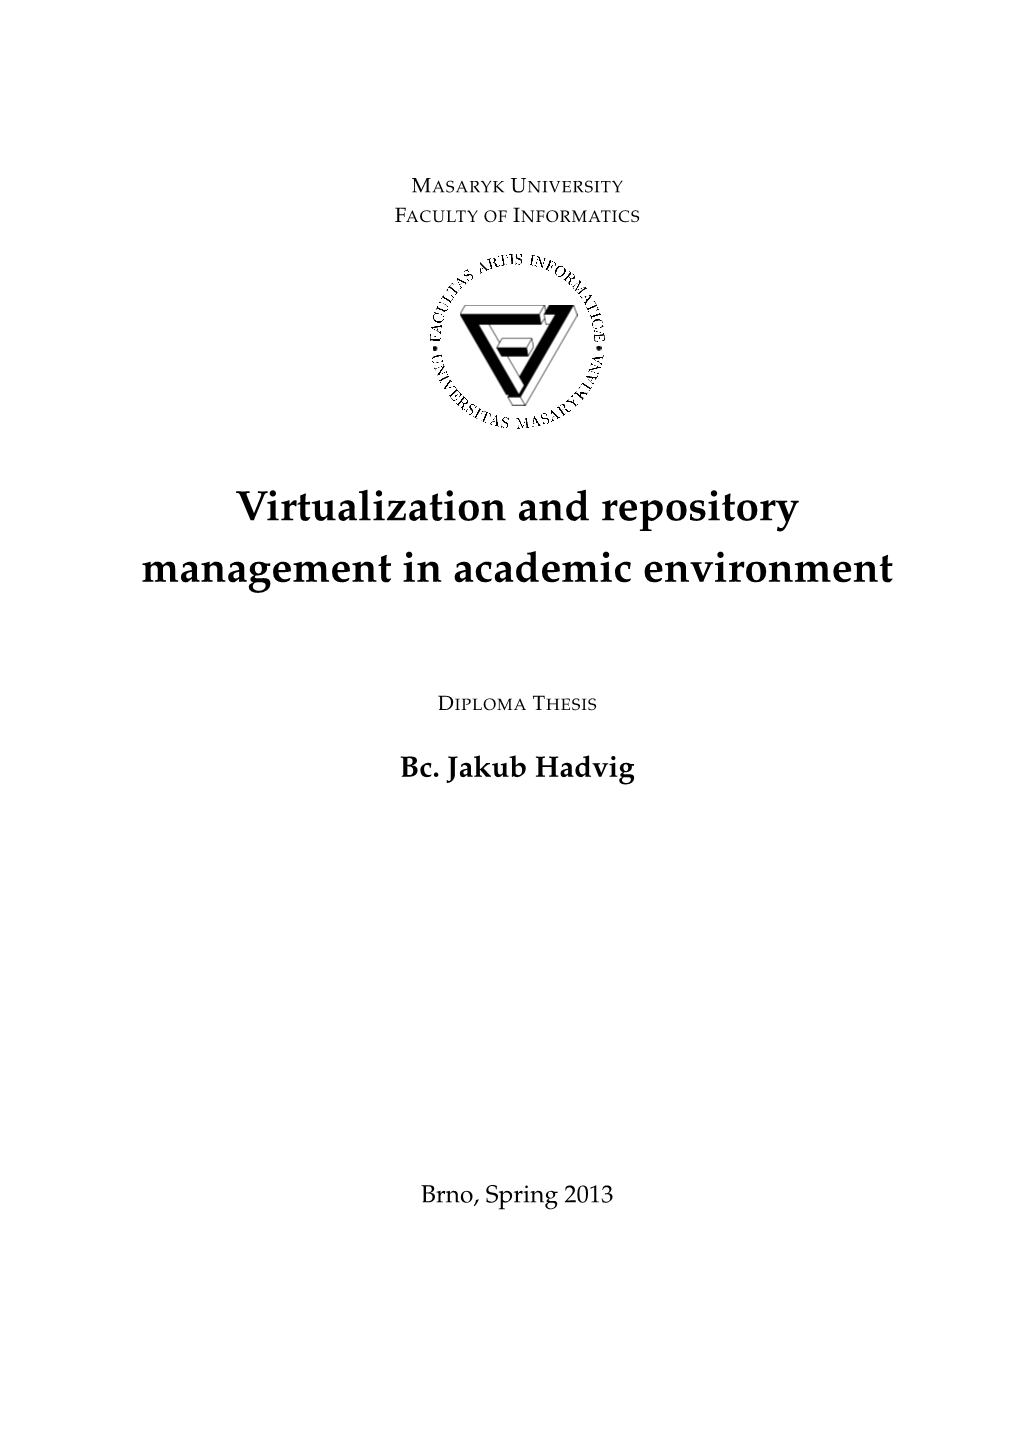 Virtualization and Repository Management in Academic Environment